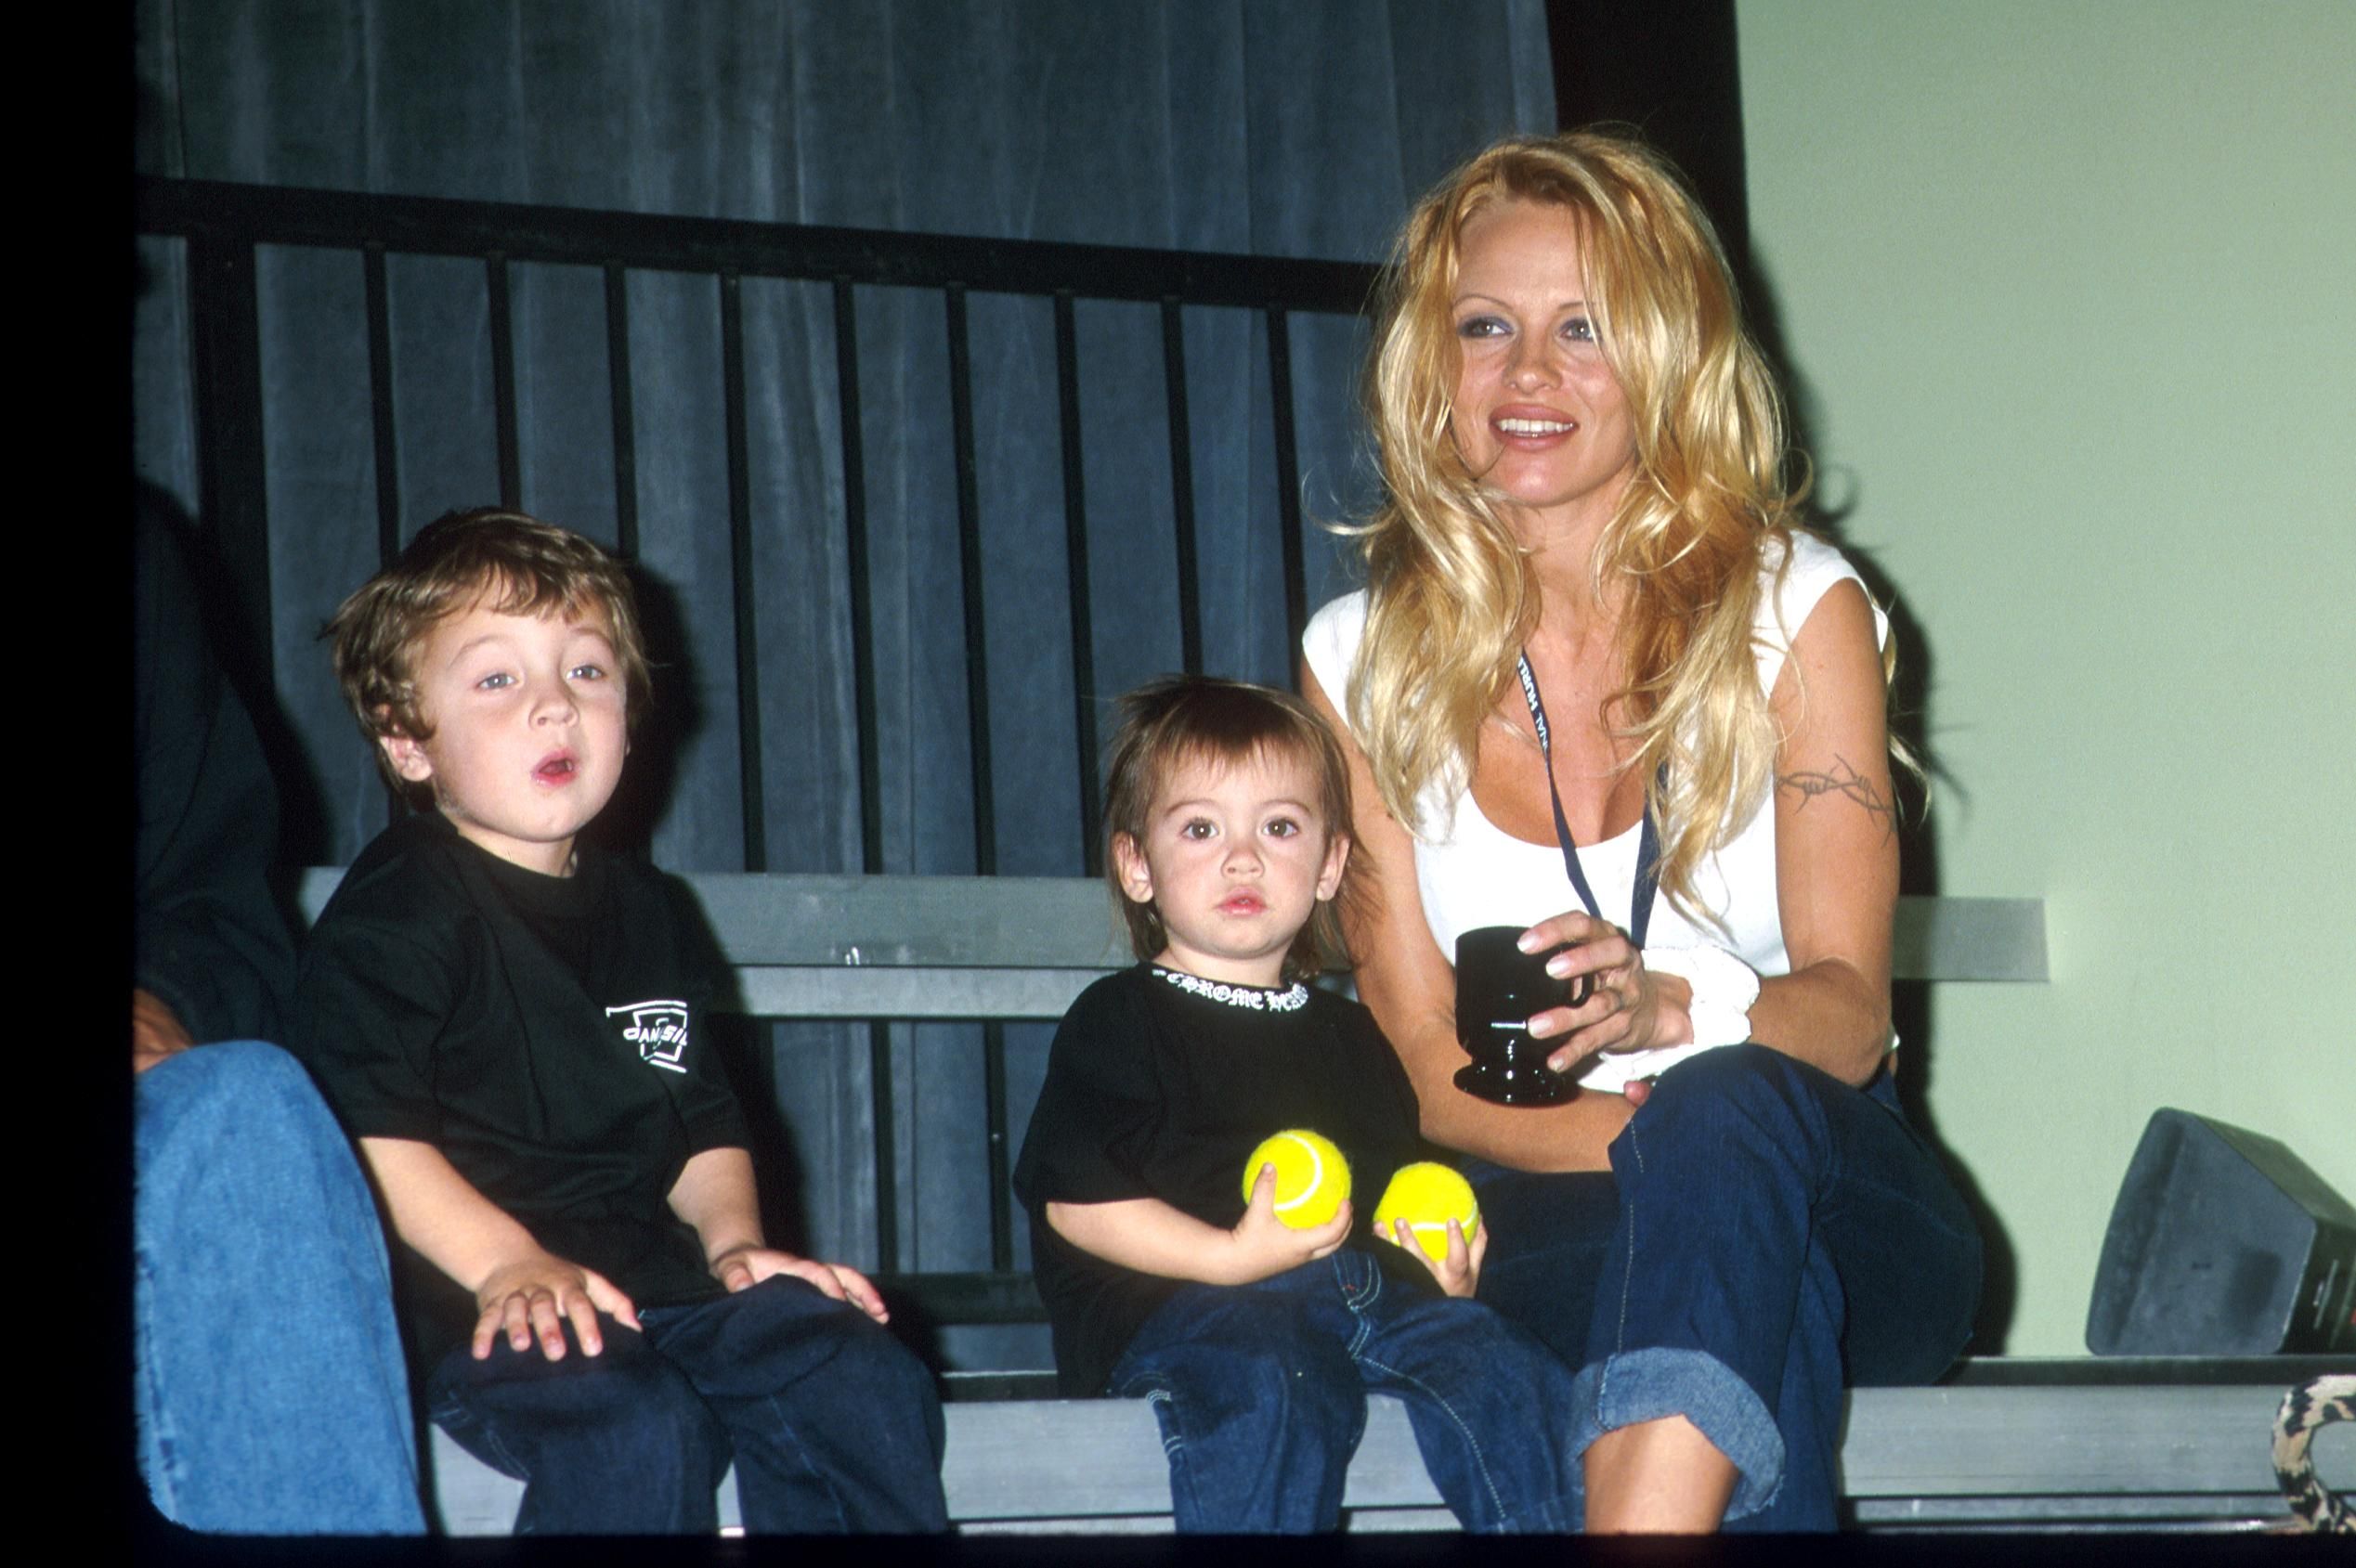 Pamela Anderson with her two children, Brandon and Dylan, whom she shares with her first husband. | Source: Getty Images